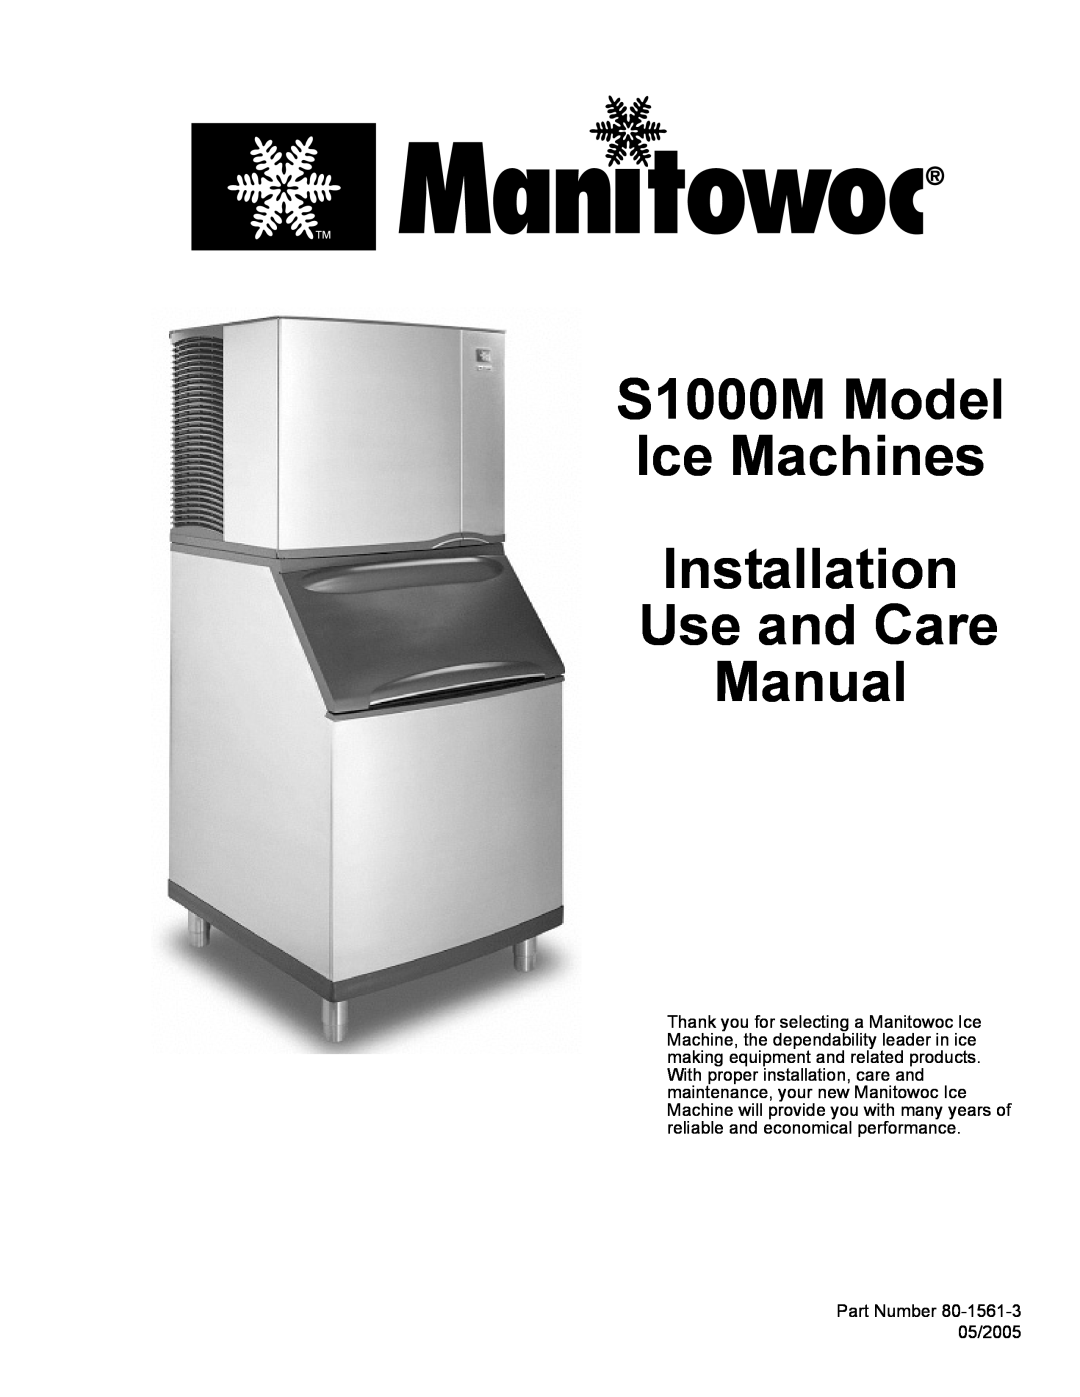 Manitowoc Ice manual Installation Use and Care Manual, S1000M Model Ice Machines 